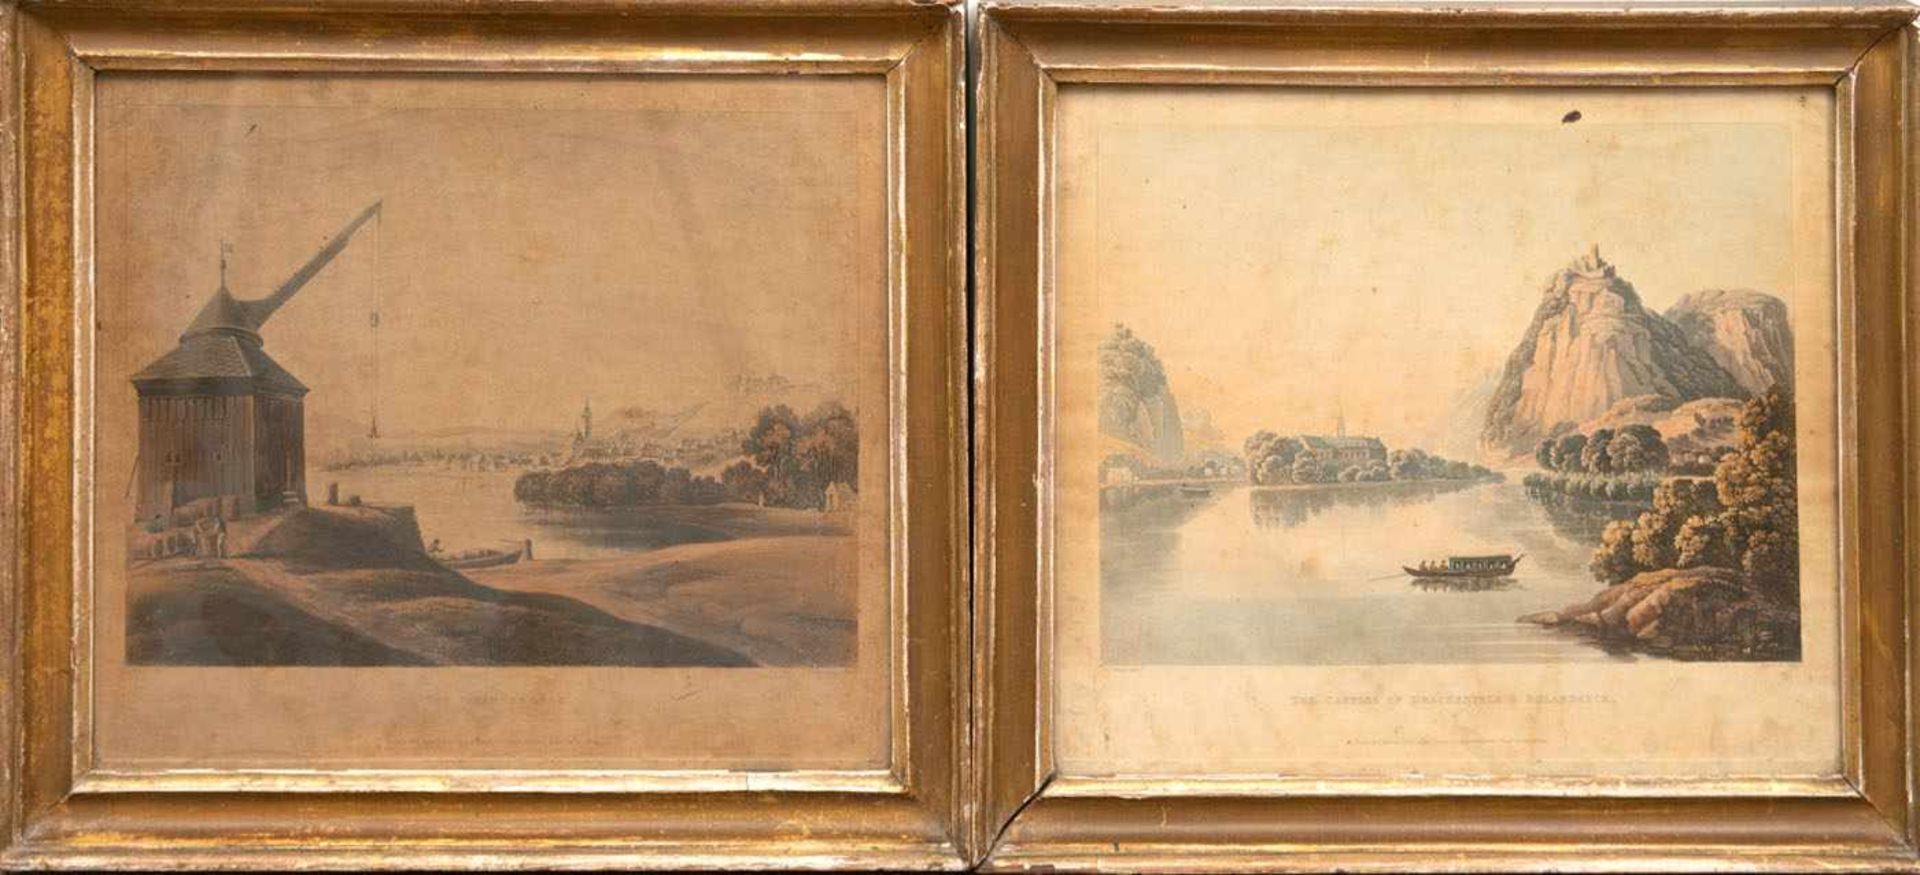 "The Johannes Berg-Views on the Rhine" und "The Castles of Drachenfels u. Rolandseck-Views of the "